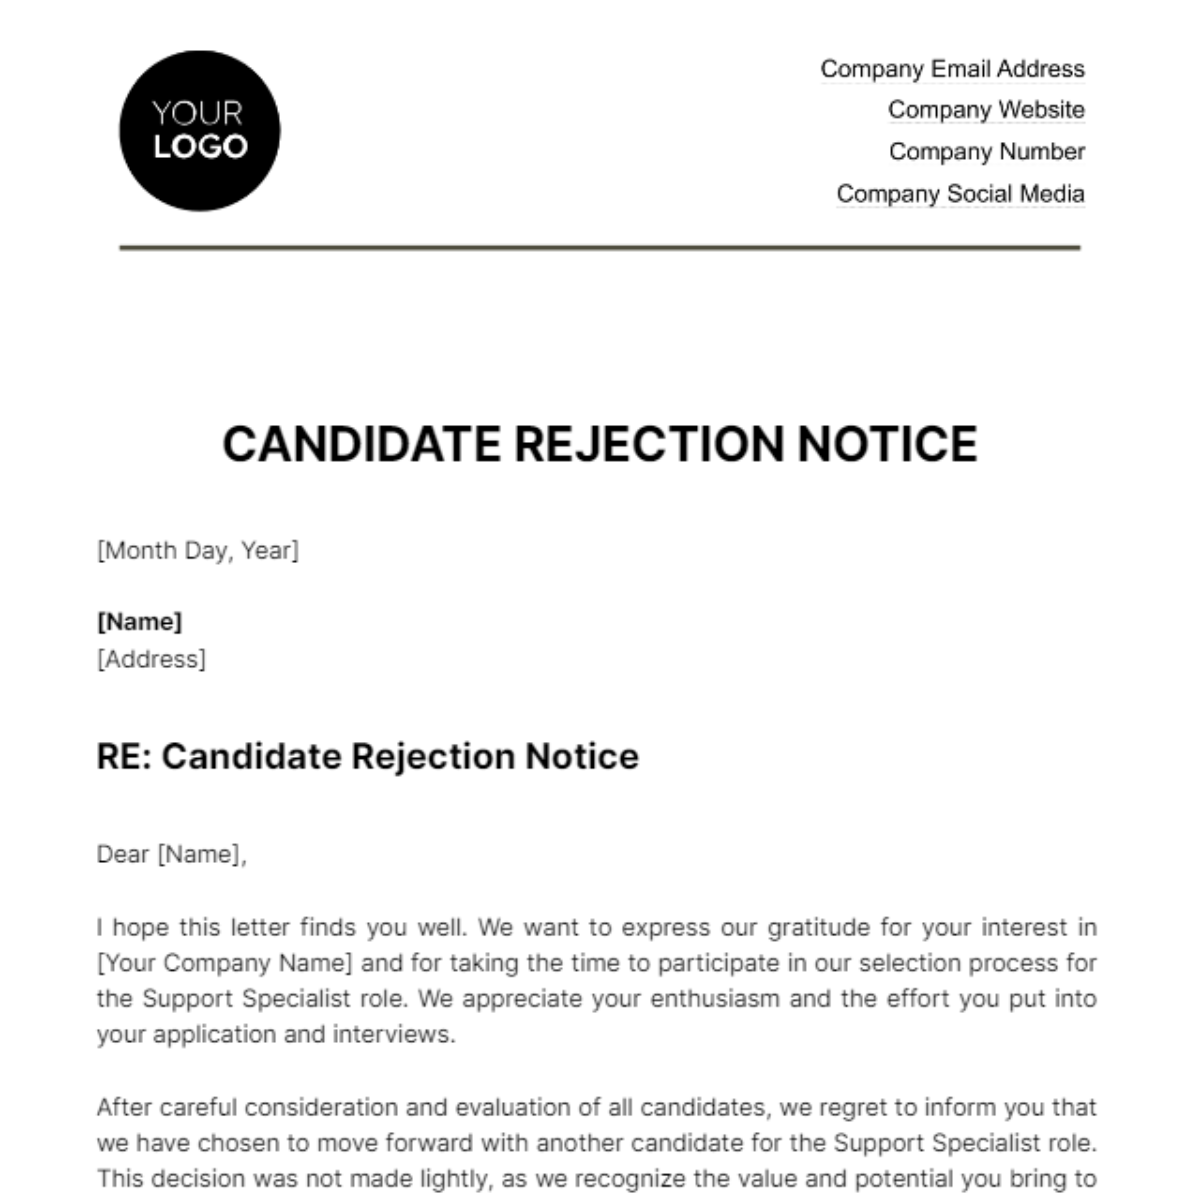 Candidate Rejection Notice HR Template